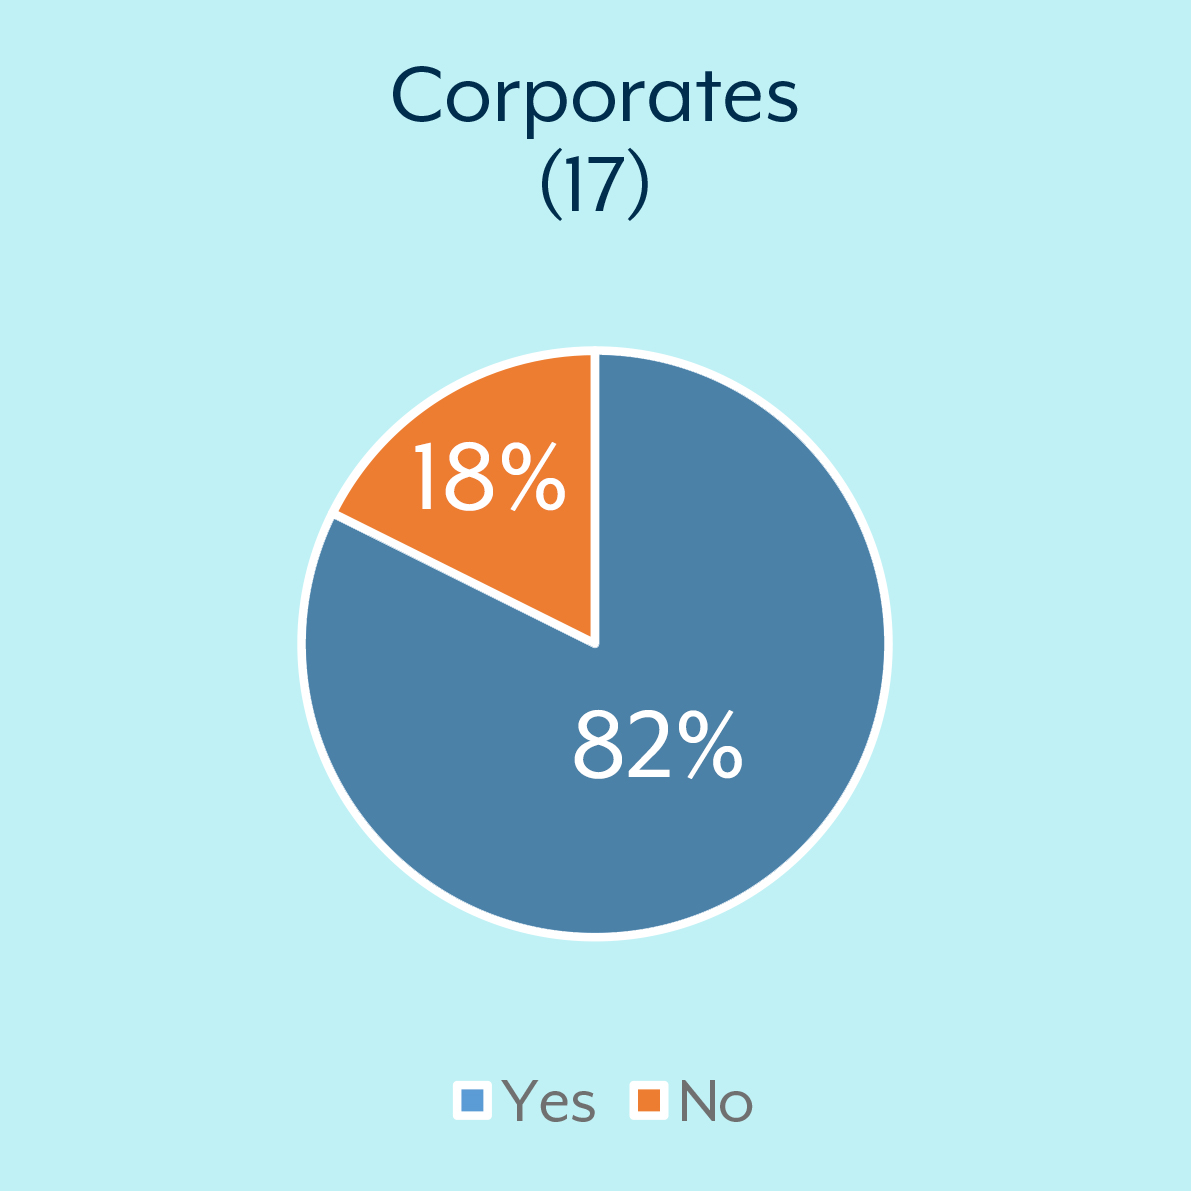 Corporates: yes = 82% No 18%